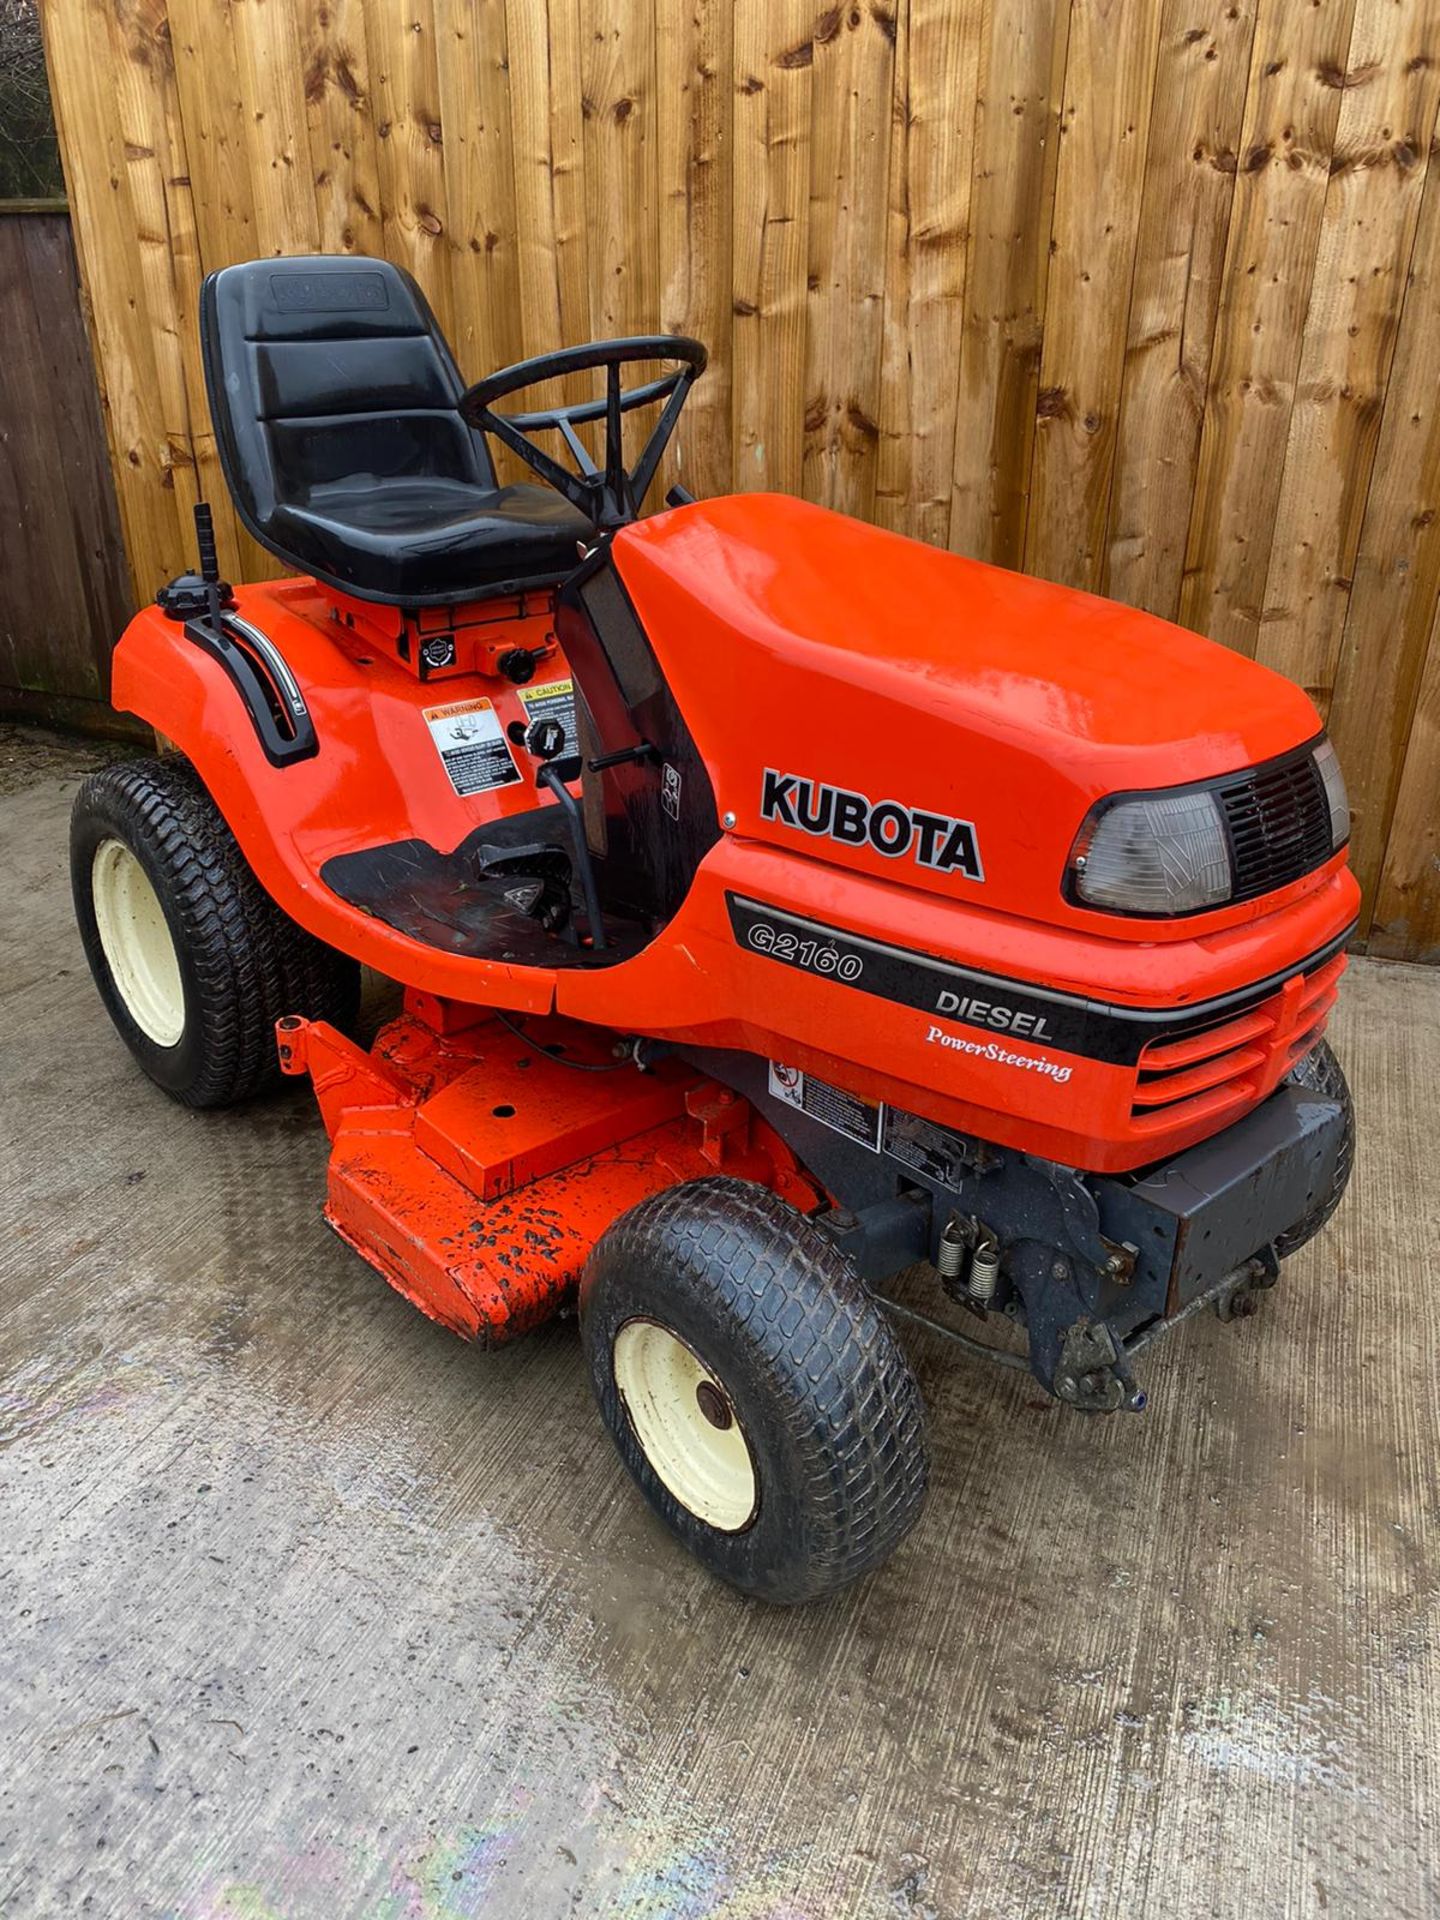 2009 KUBOTA G2160 DIESEL RIDE ON LAWN MOWER, IN EXCELLENT CONDITION *PLUS VAT* - Image 4 of 4